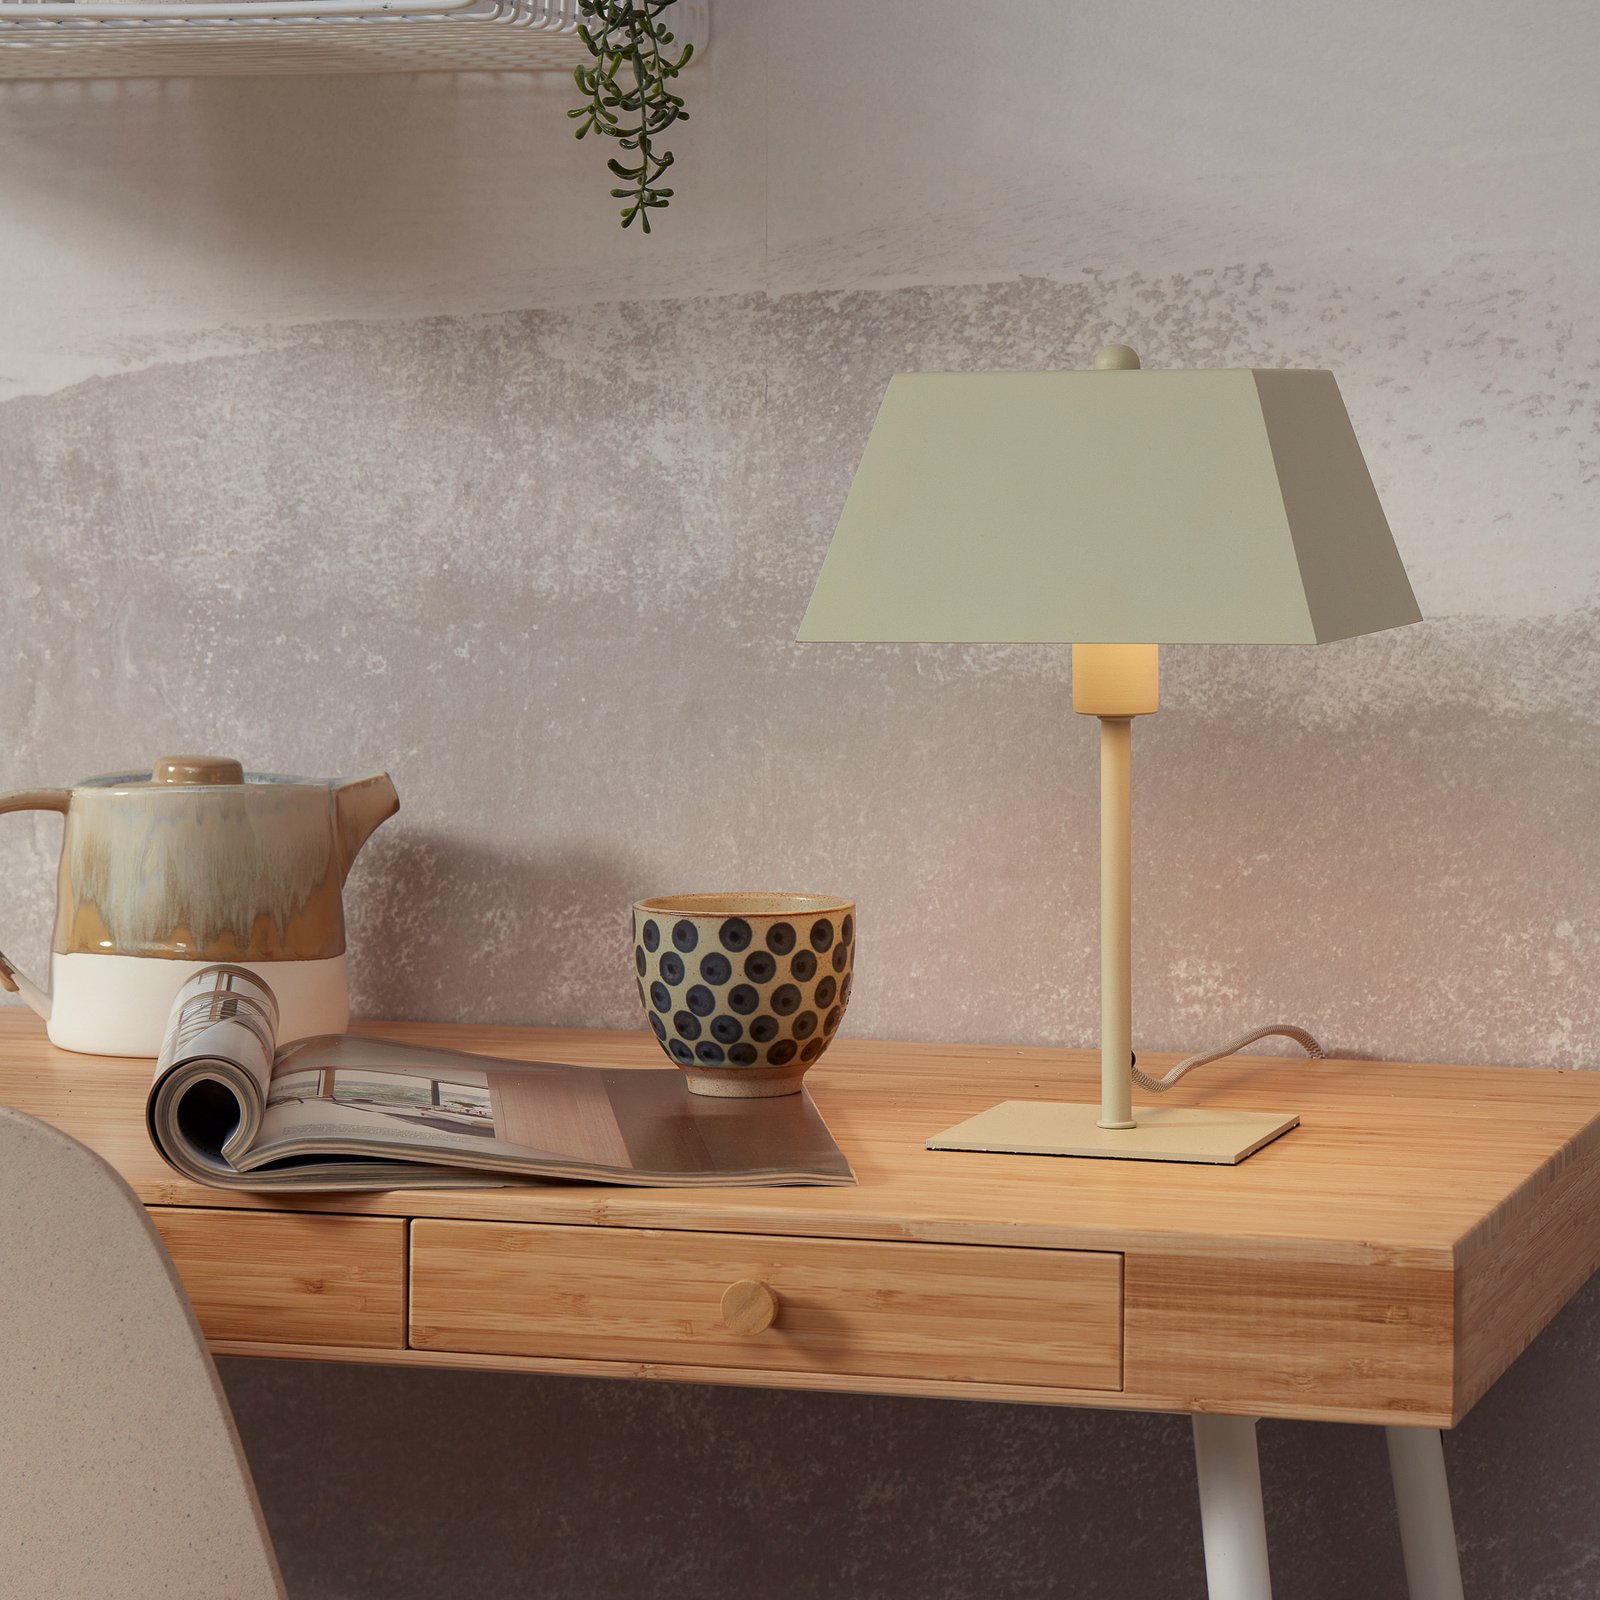 It's about RoMi table lamp Perth, light green